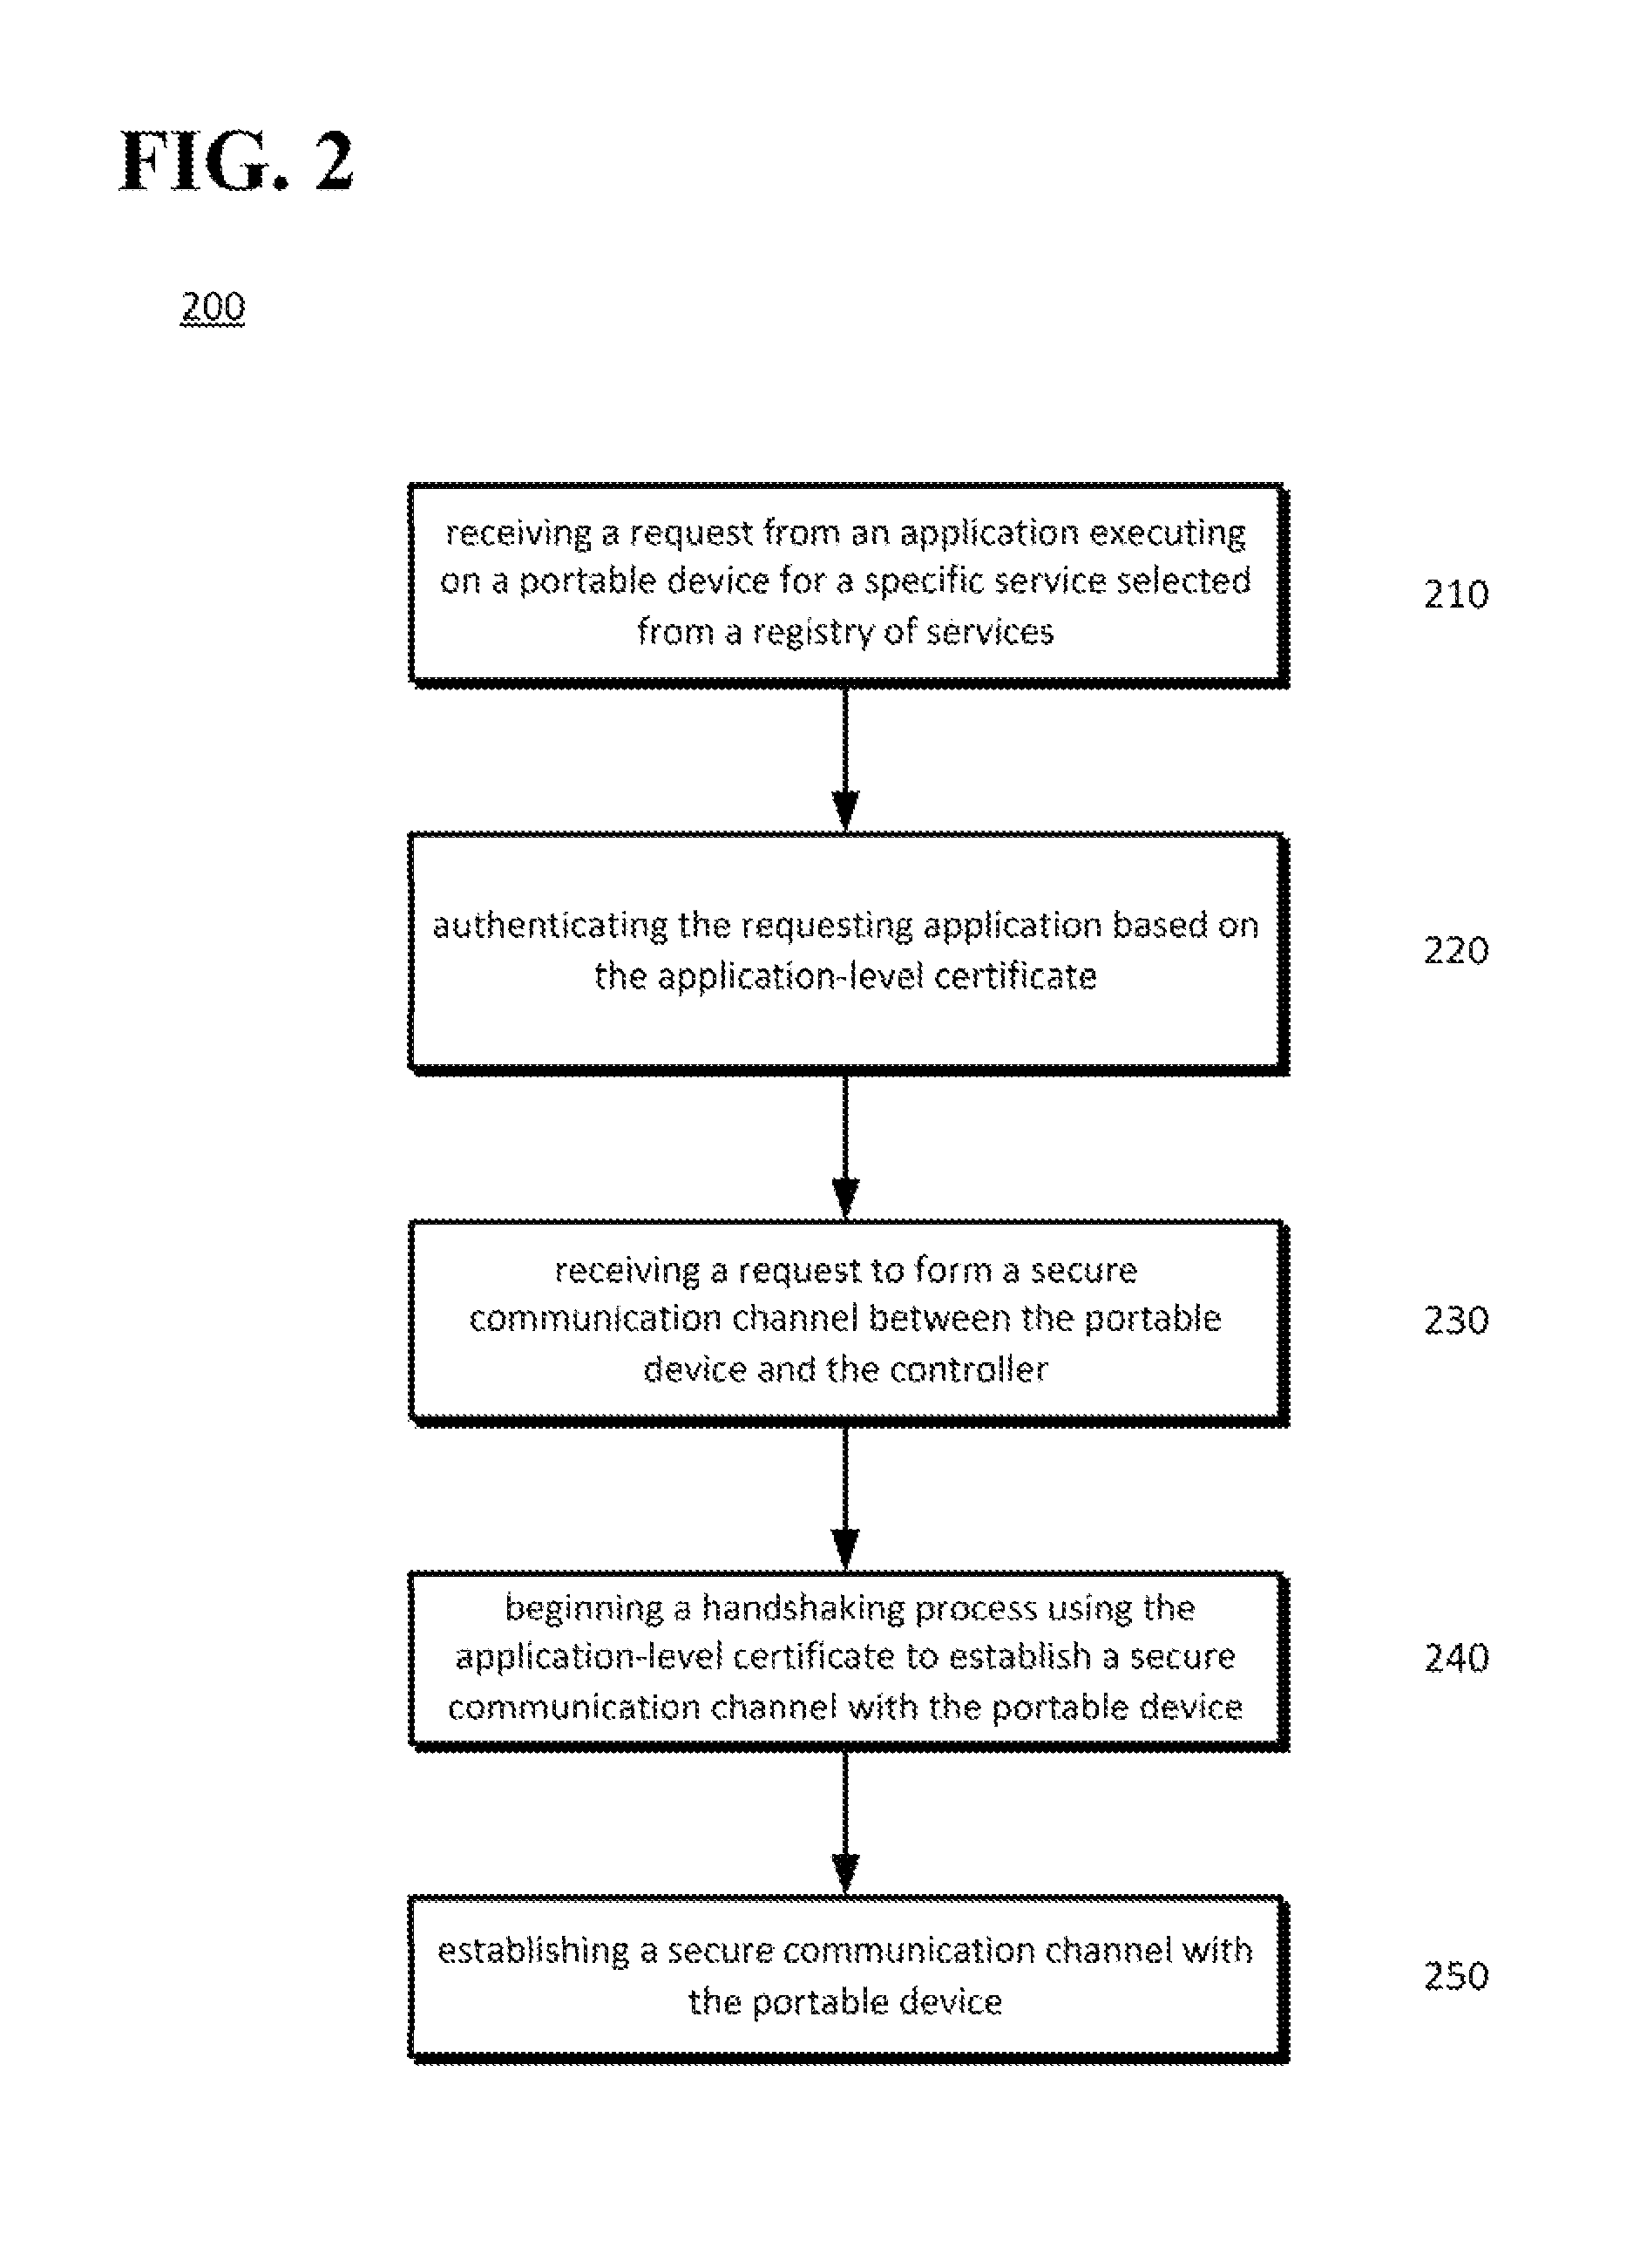 Application-level certificates for identity and authorization